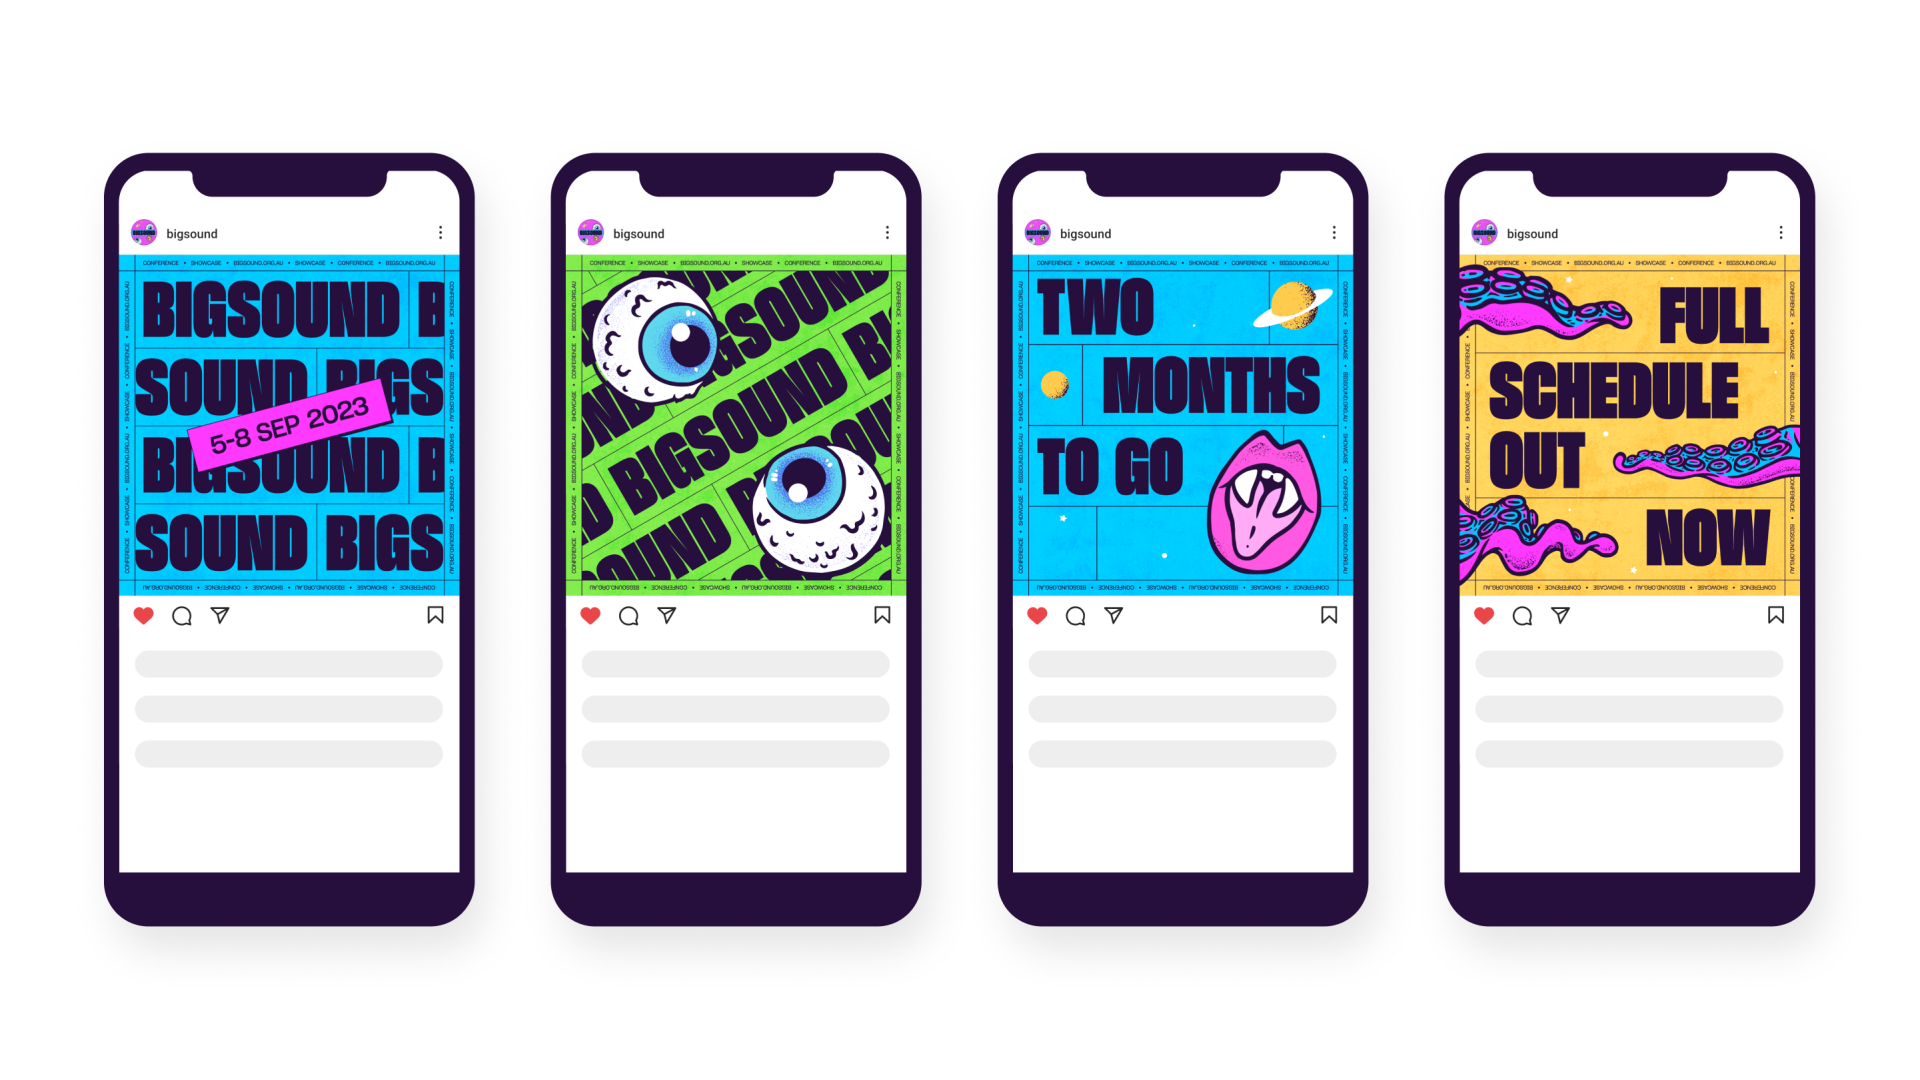 Four mobile phones showing social media post designs for Bigsound 2023